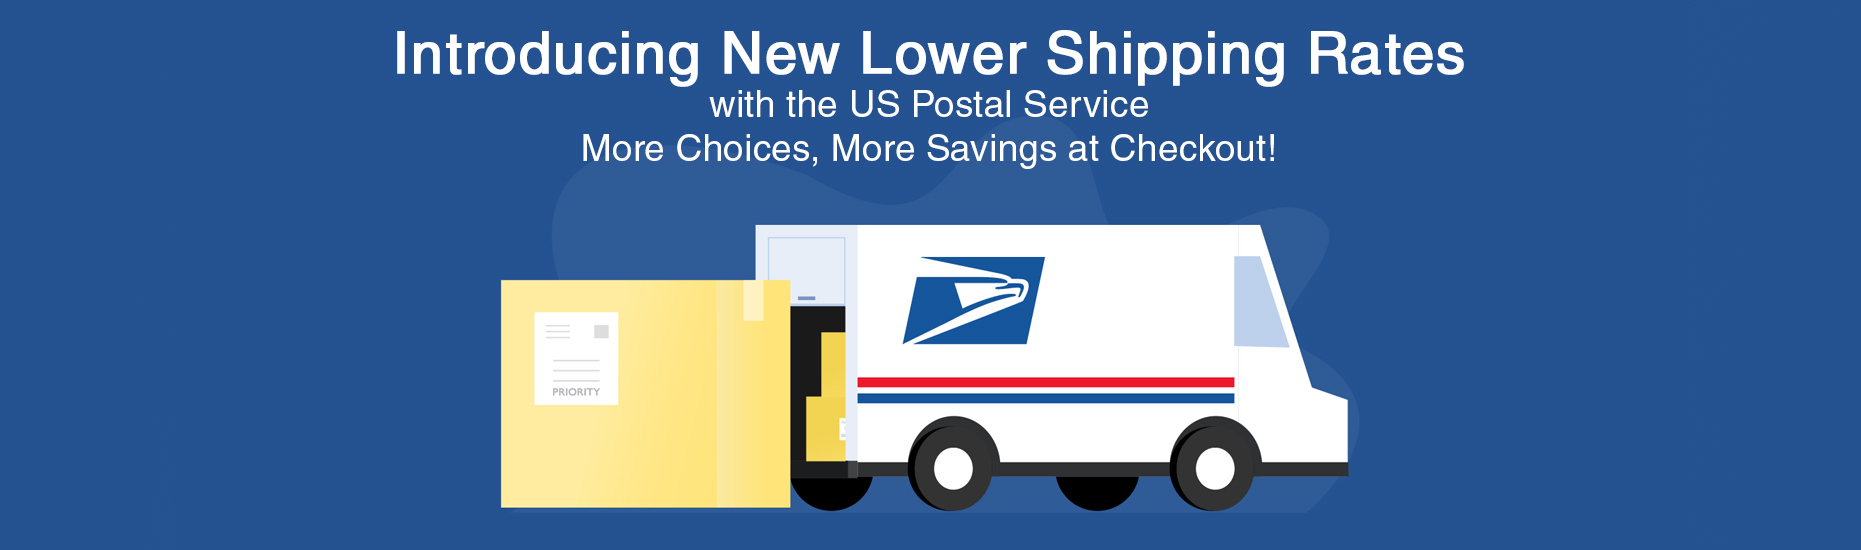 Introducing New Lower Shipping Rates with US Postal Service